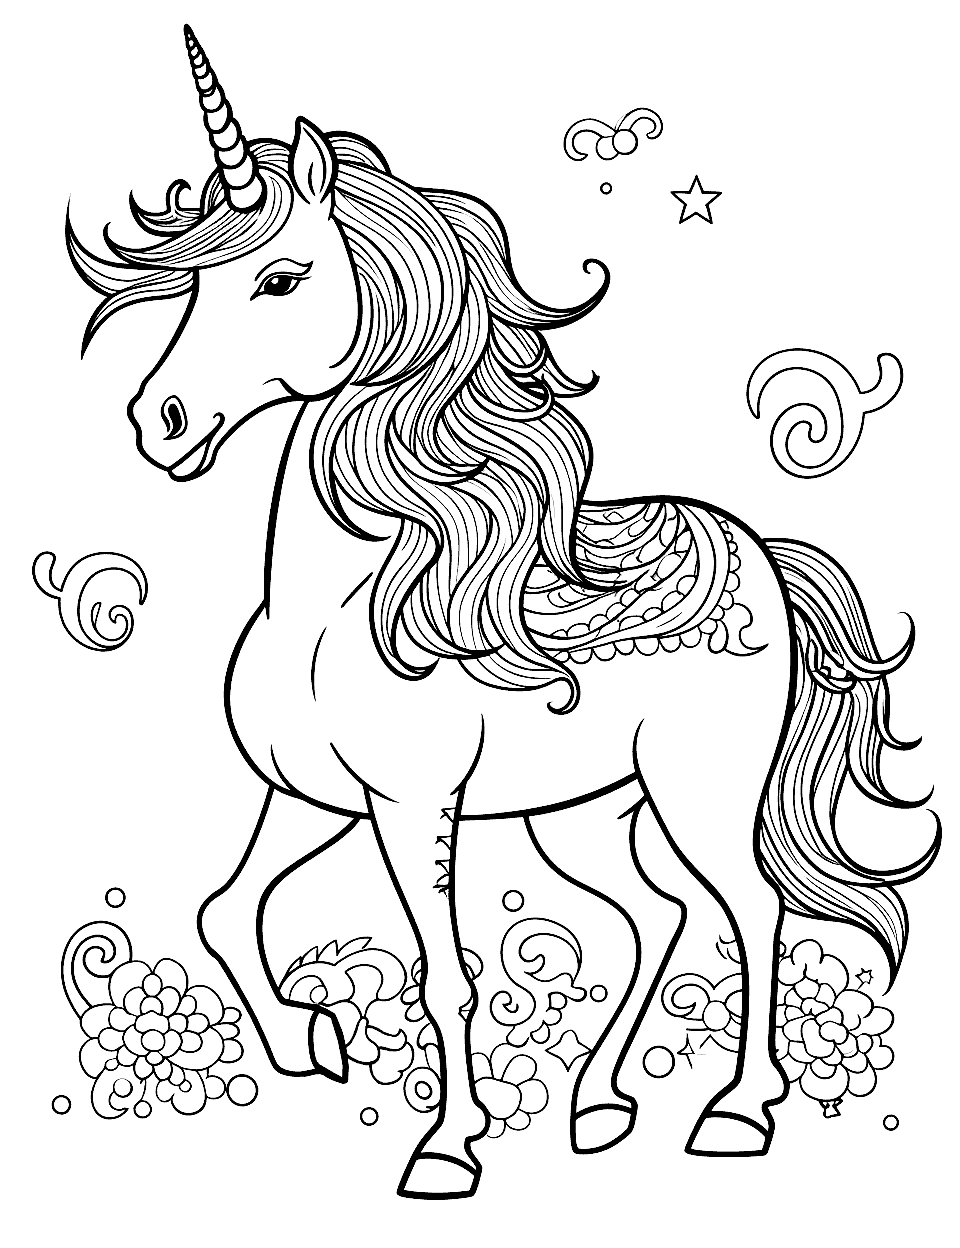 Unicorn and Tribal Art Coloring Page - A unicorn with tribal patterns, surrounded by tribal motifs and symbols for a cultural coloring experience.